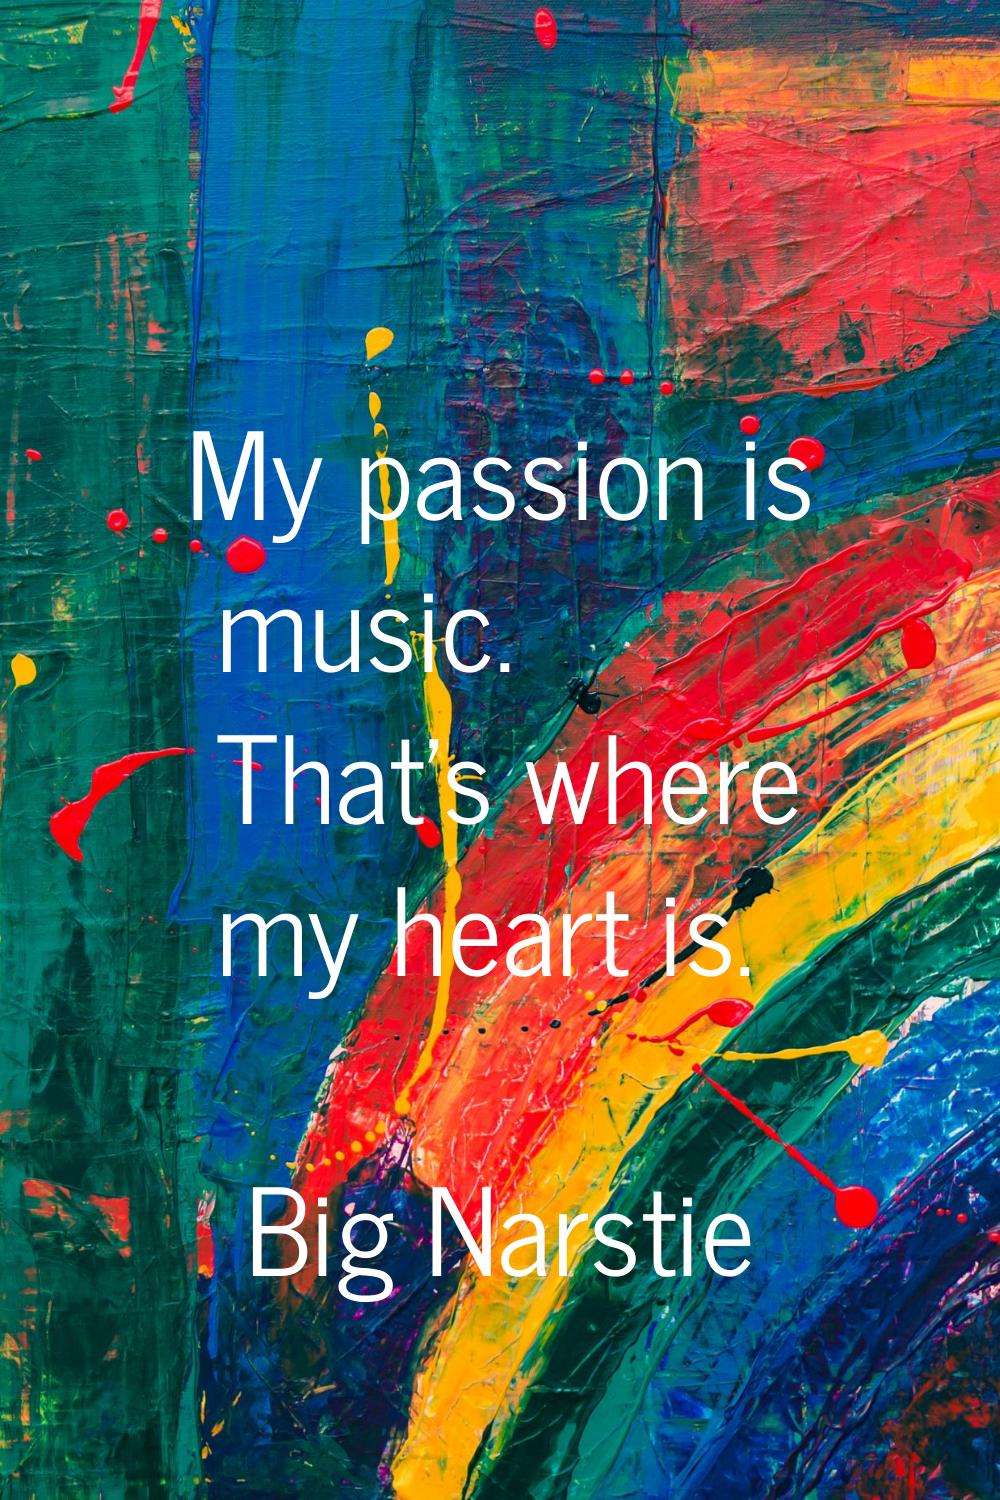 My passion is music. That's where my heart is.